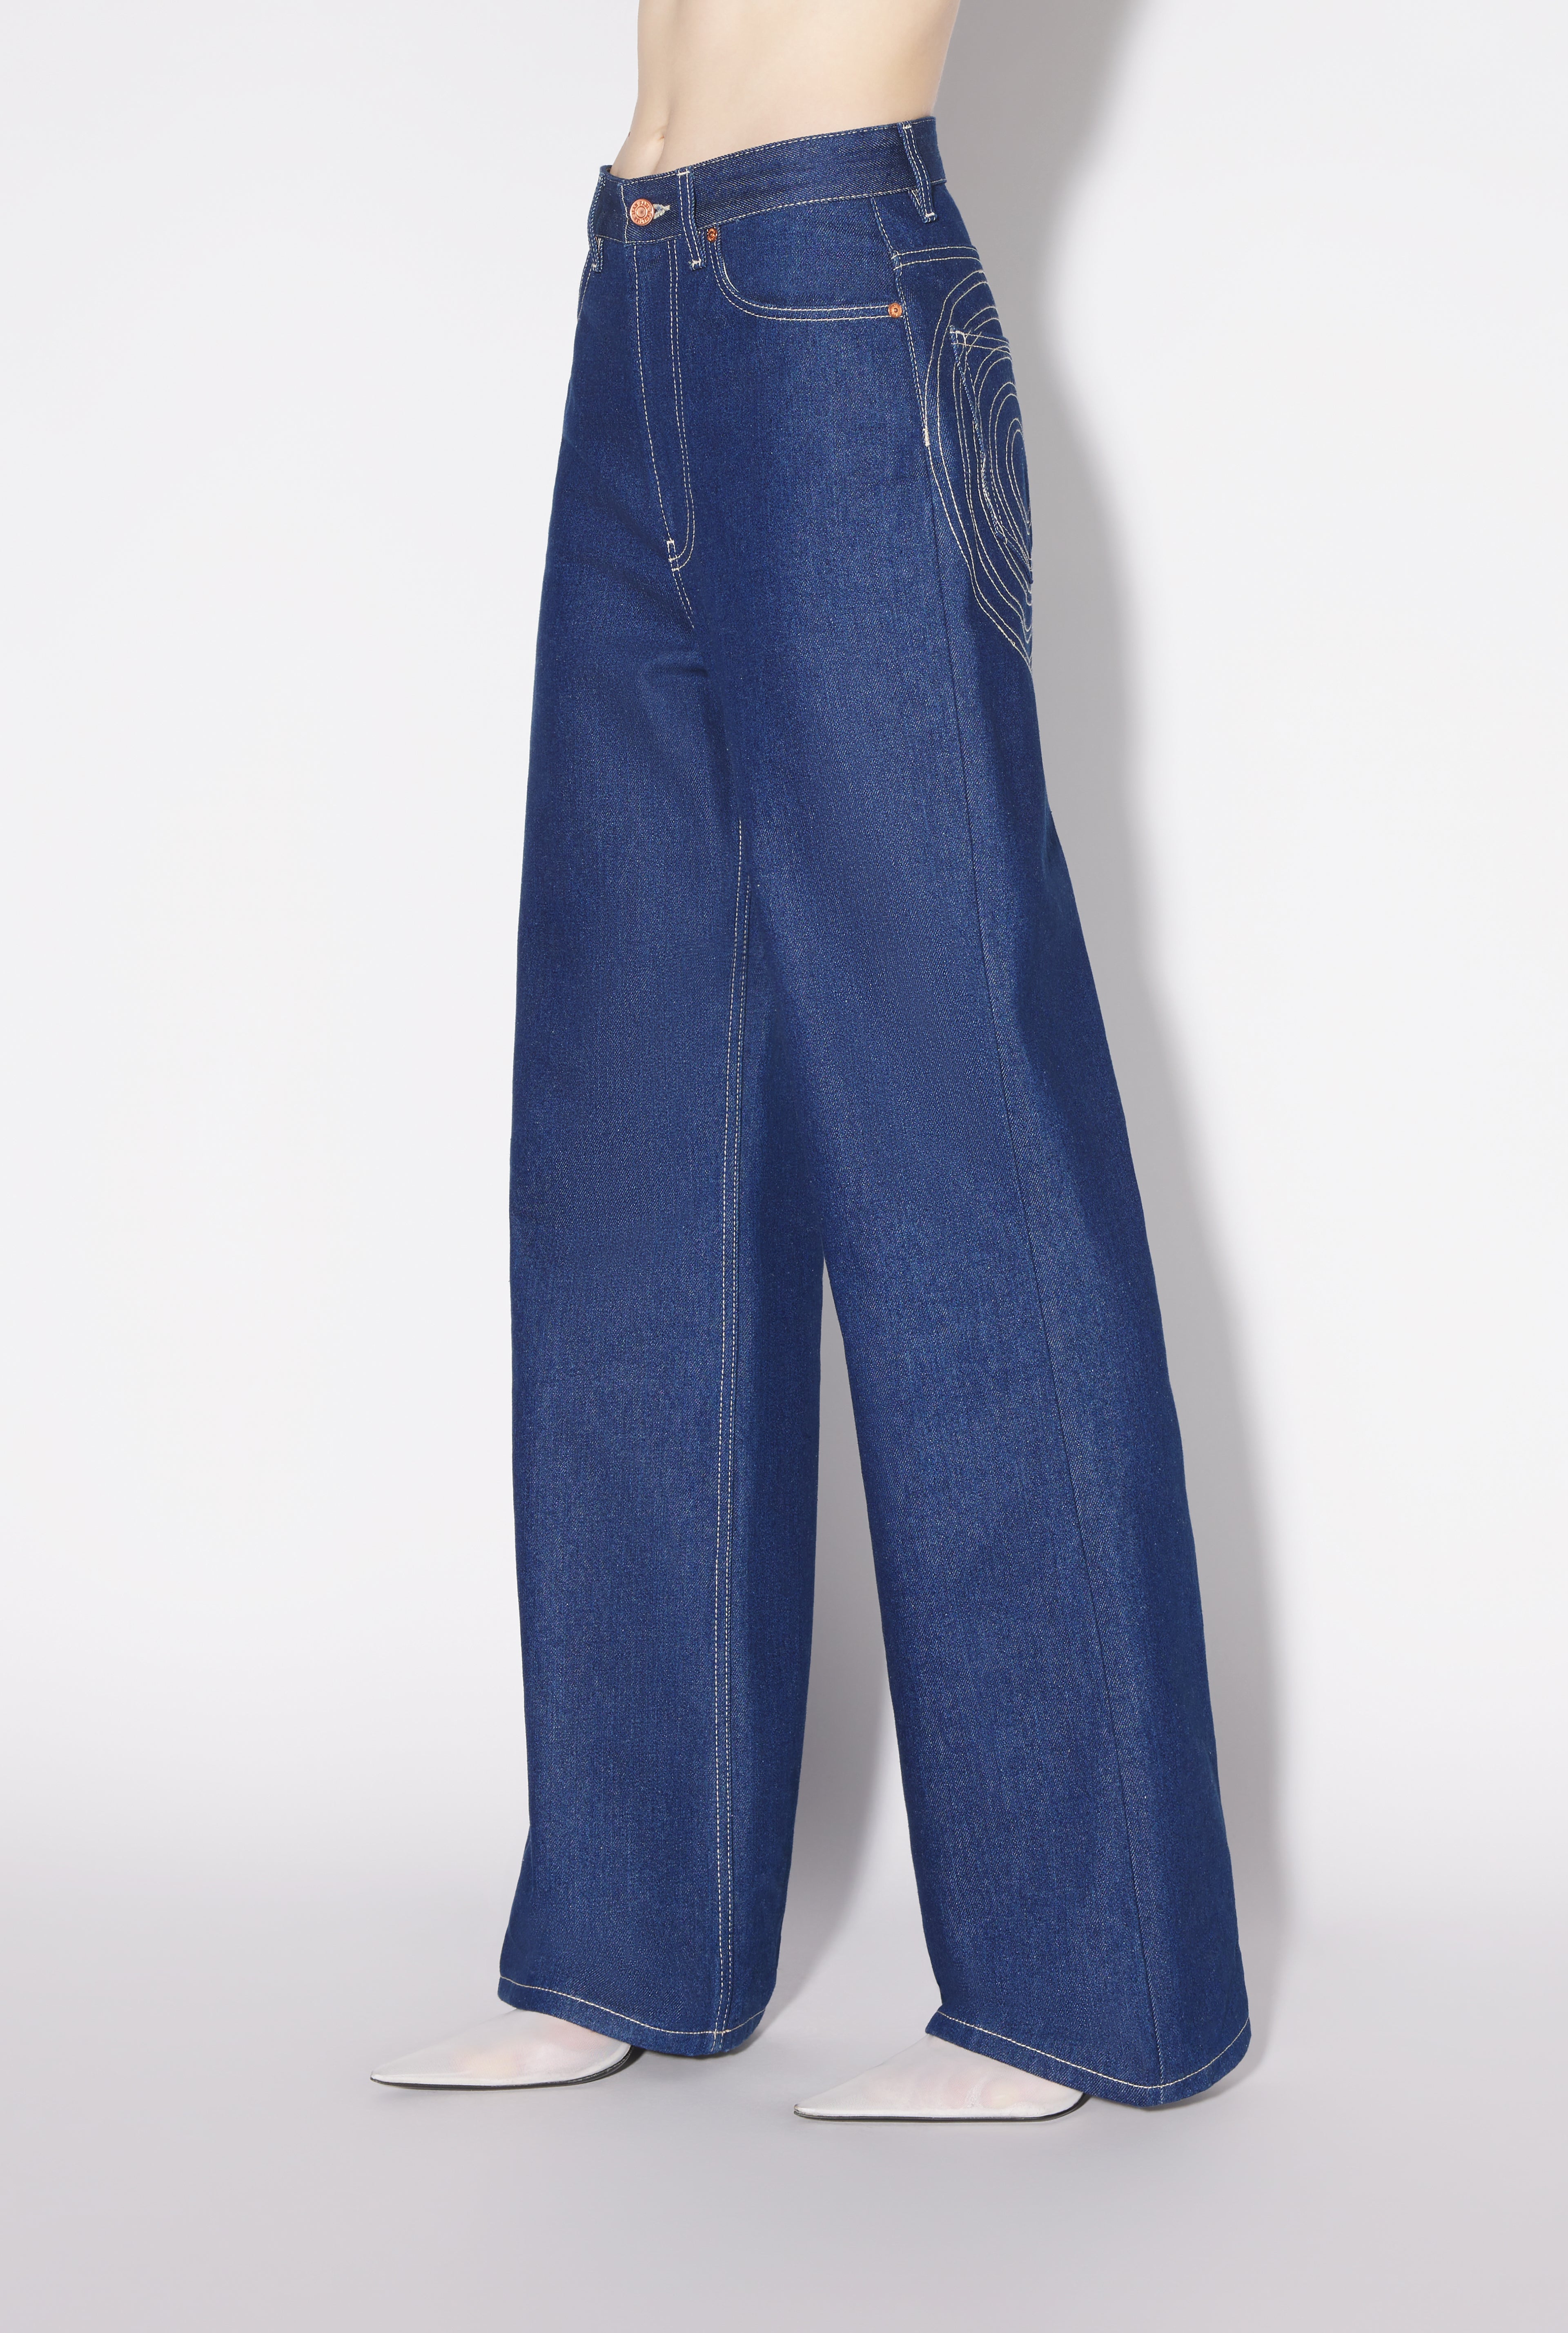 The Conical Denim Jeans